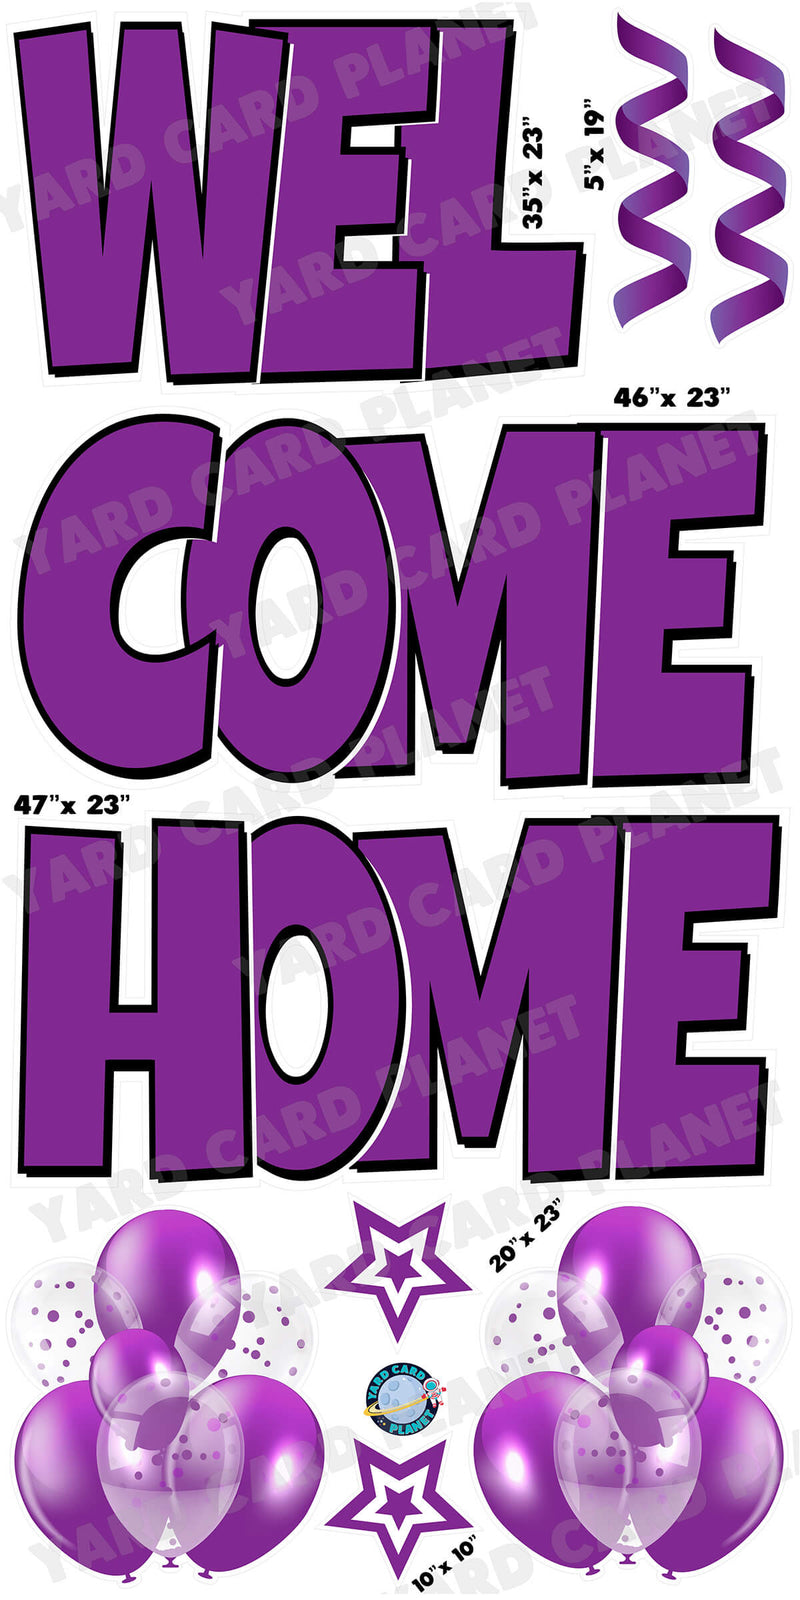 Large 23" Welcome Home Yard Card EZ Quick Sets in Luckiest Guy Font and Flair in Purple Solid Color